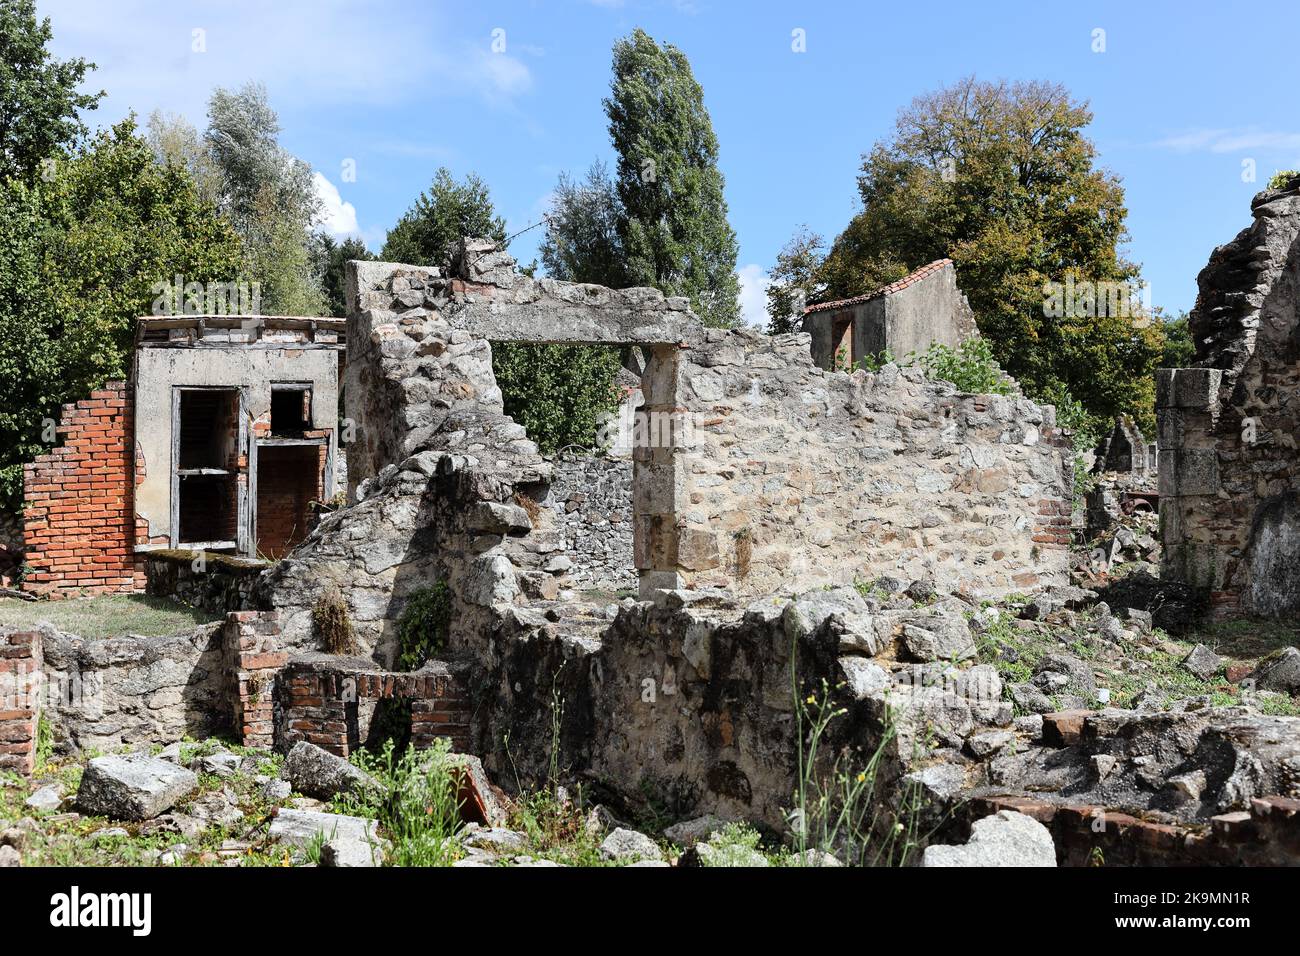 The remains of the Village of Oradour-sur-Glane where 643 men women and children were Murdered by the Nazis on 10th June 1944, Haute-Vienne, France Stock Photo